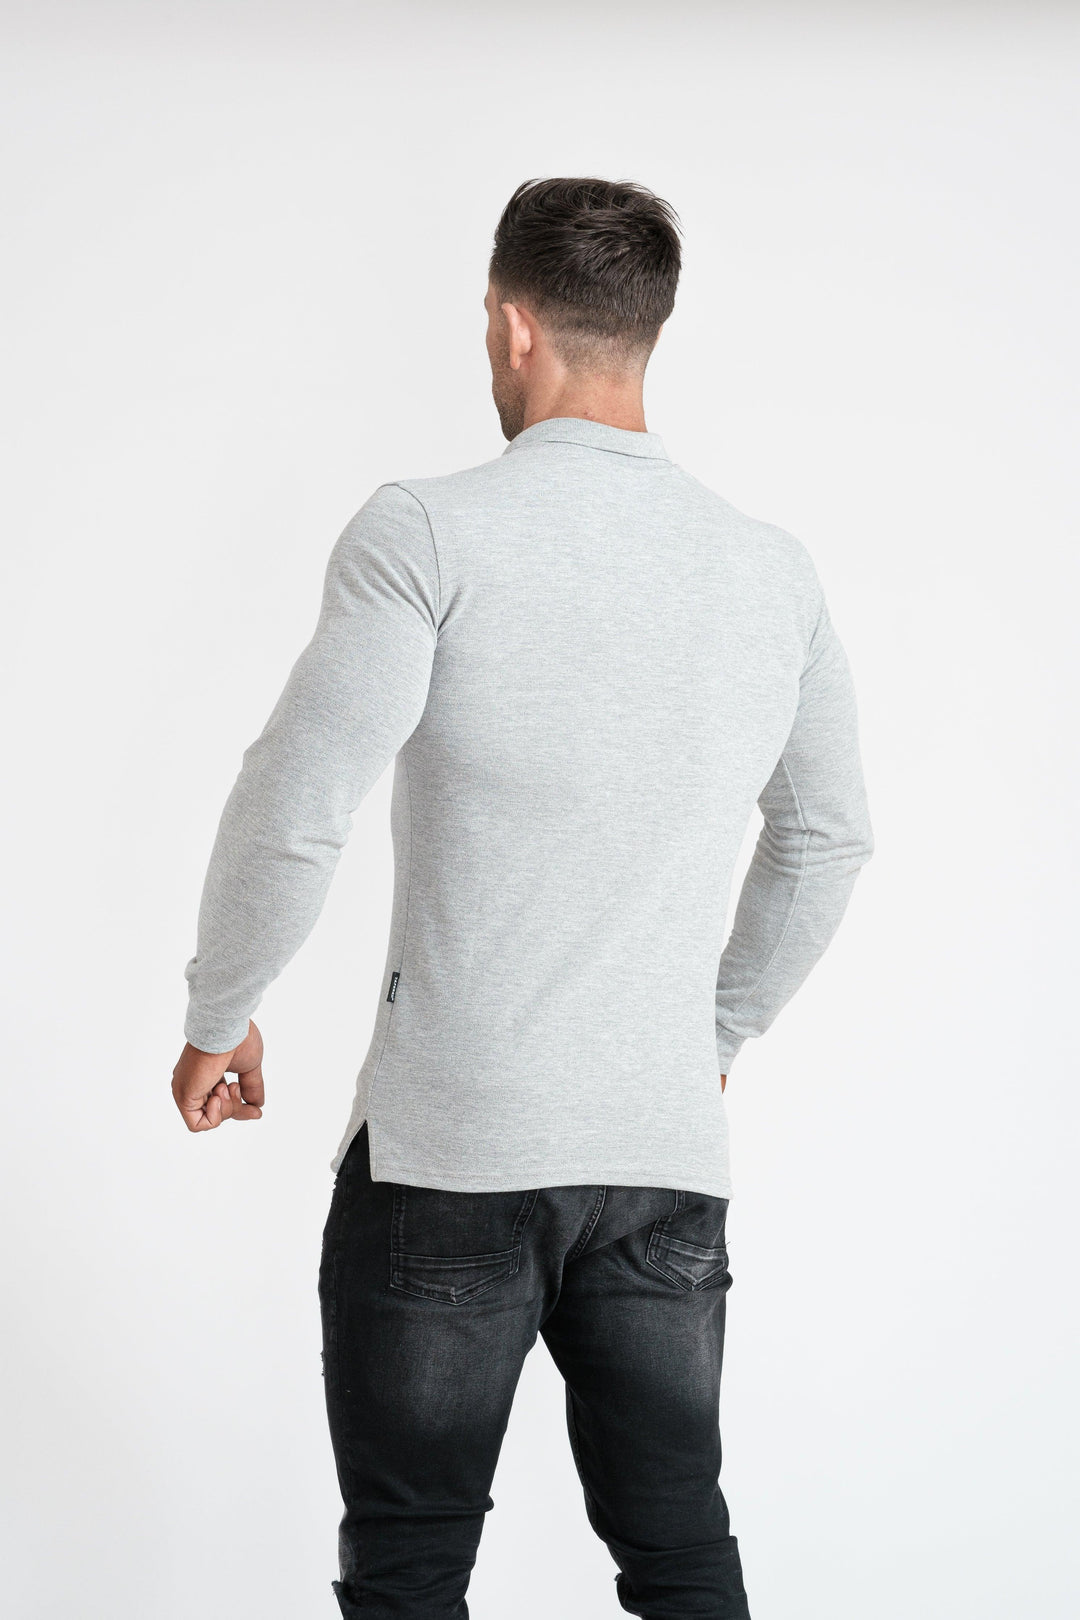 Mens Muscle Fit Grey Polo Shirt. A Proportionally Fitted and Muscle Fit Polo in Long Sleeve. Ideal for bodybuilders.